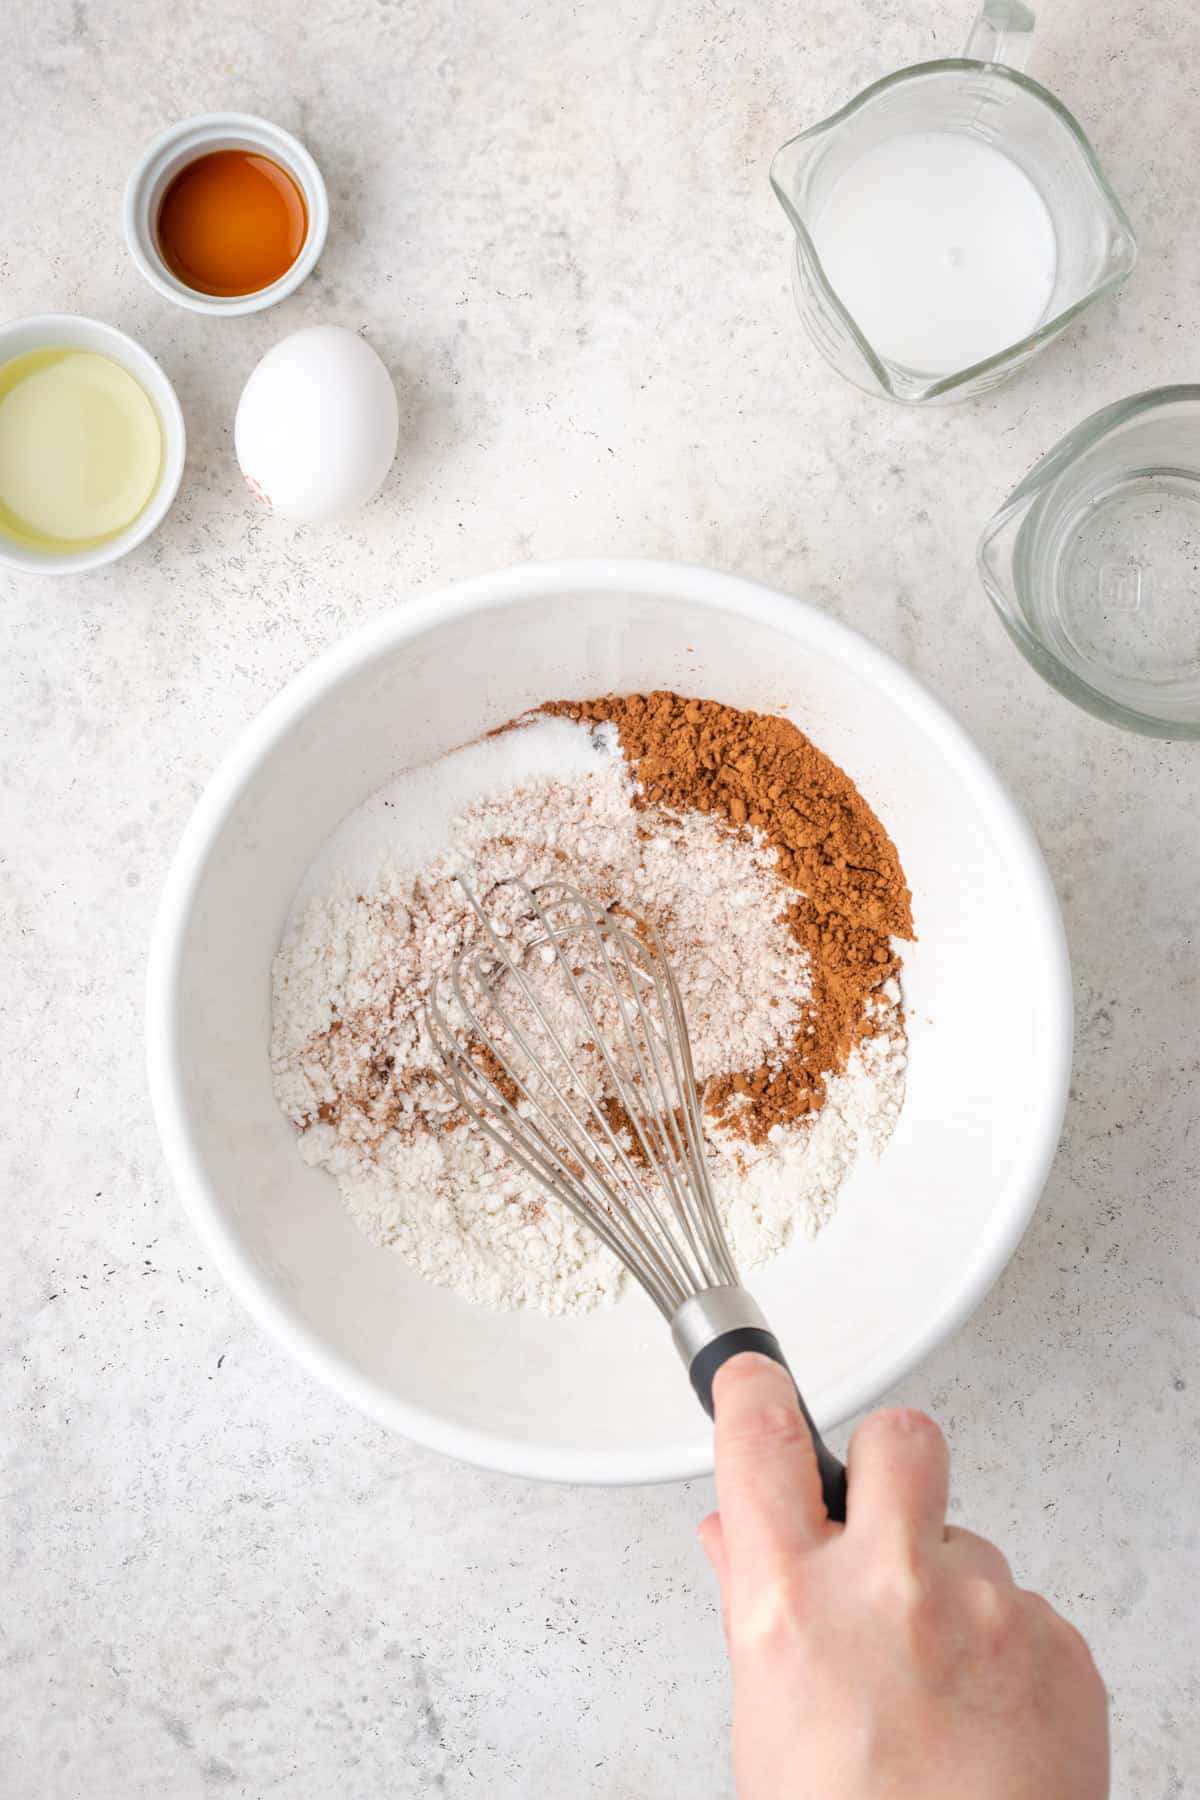 Dry ingredients being whisked together in a large white bowl.